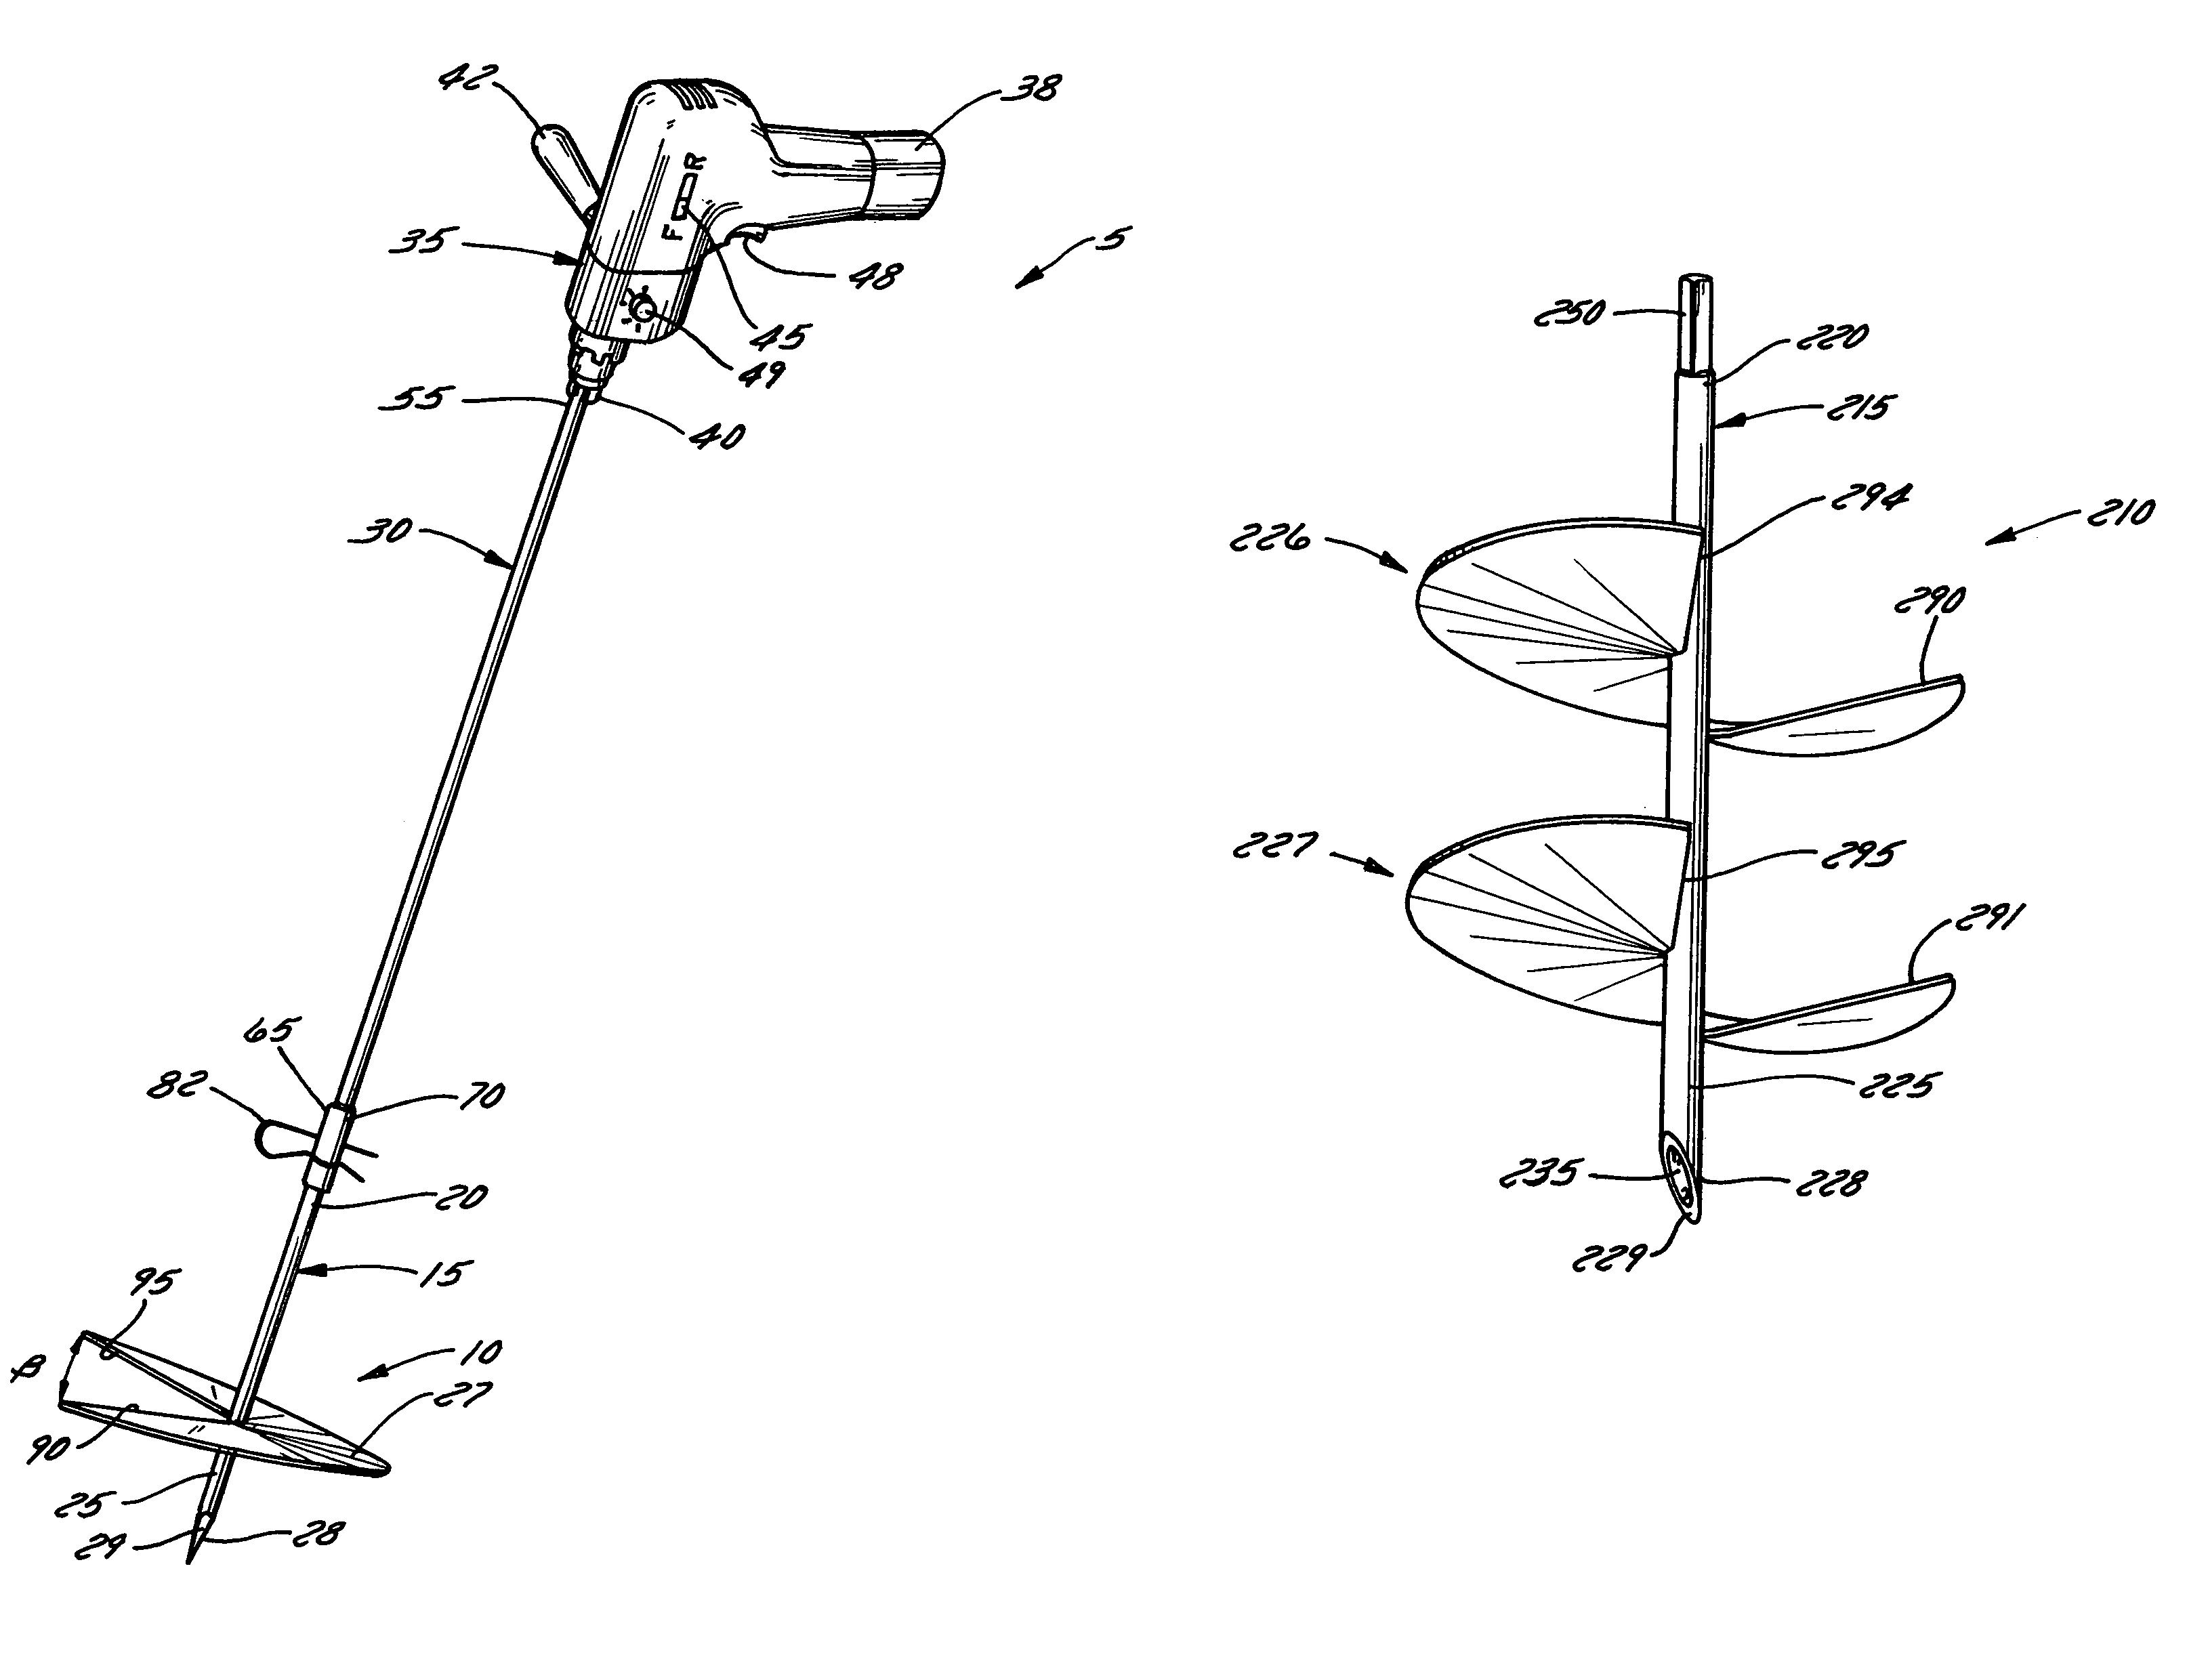 Auger for mixing and burrowing